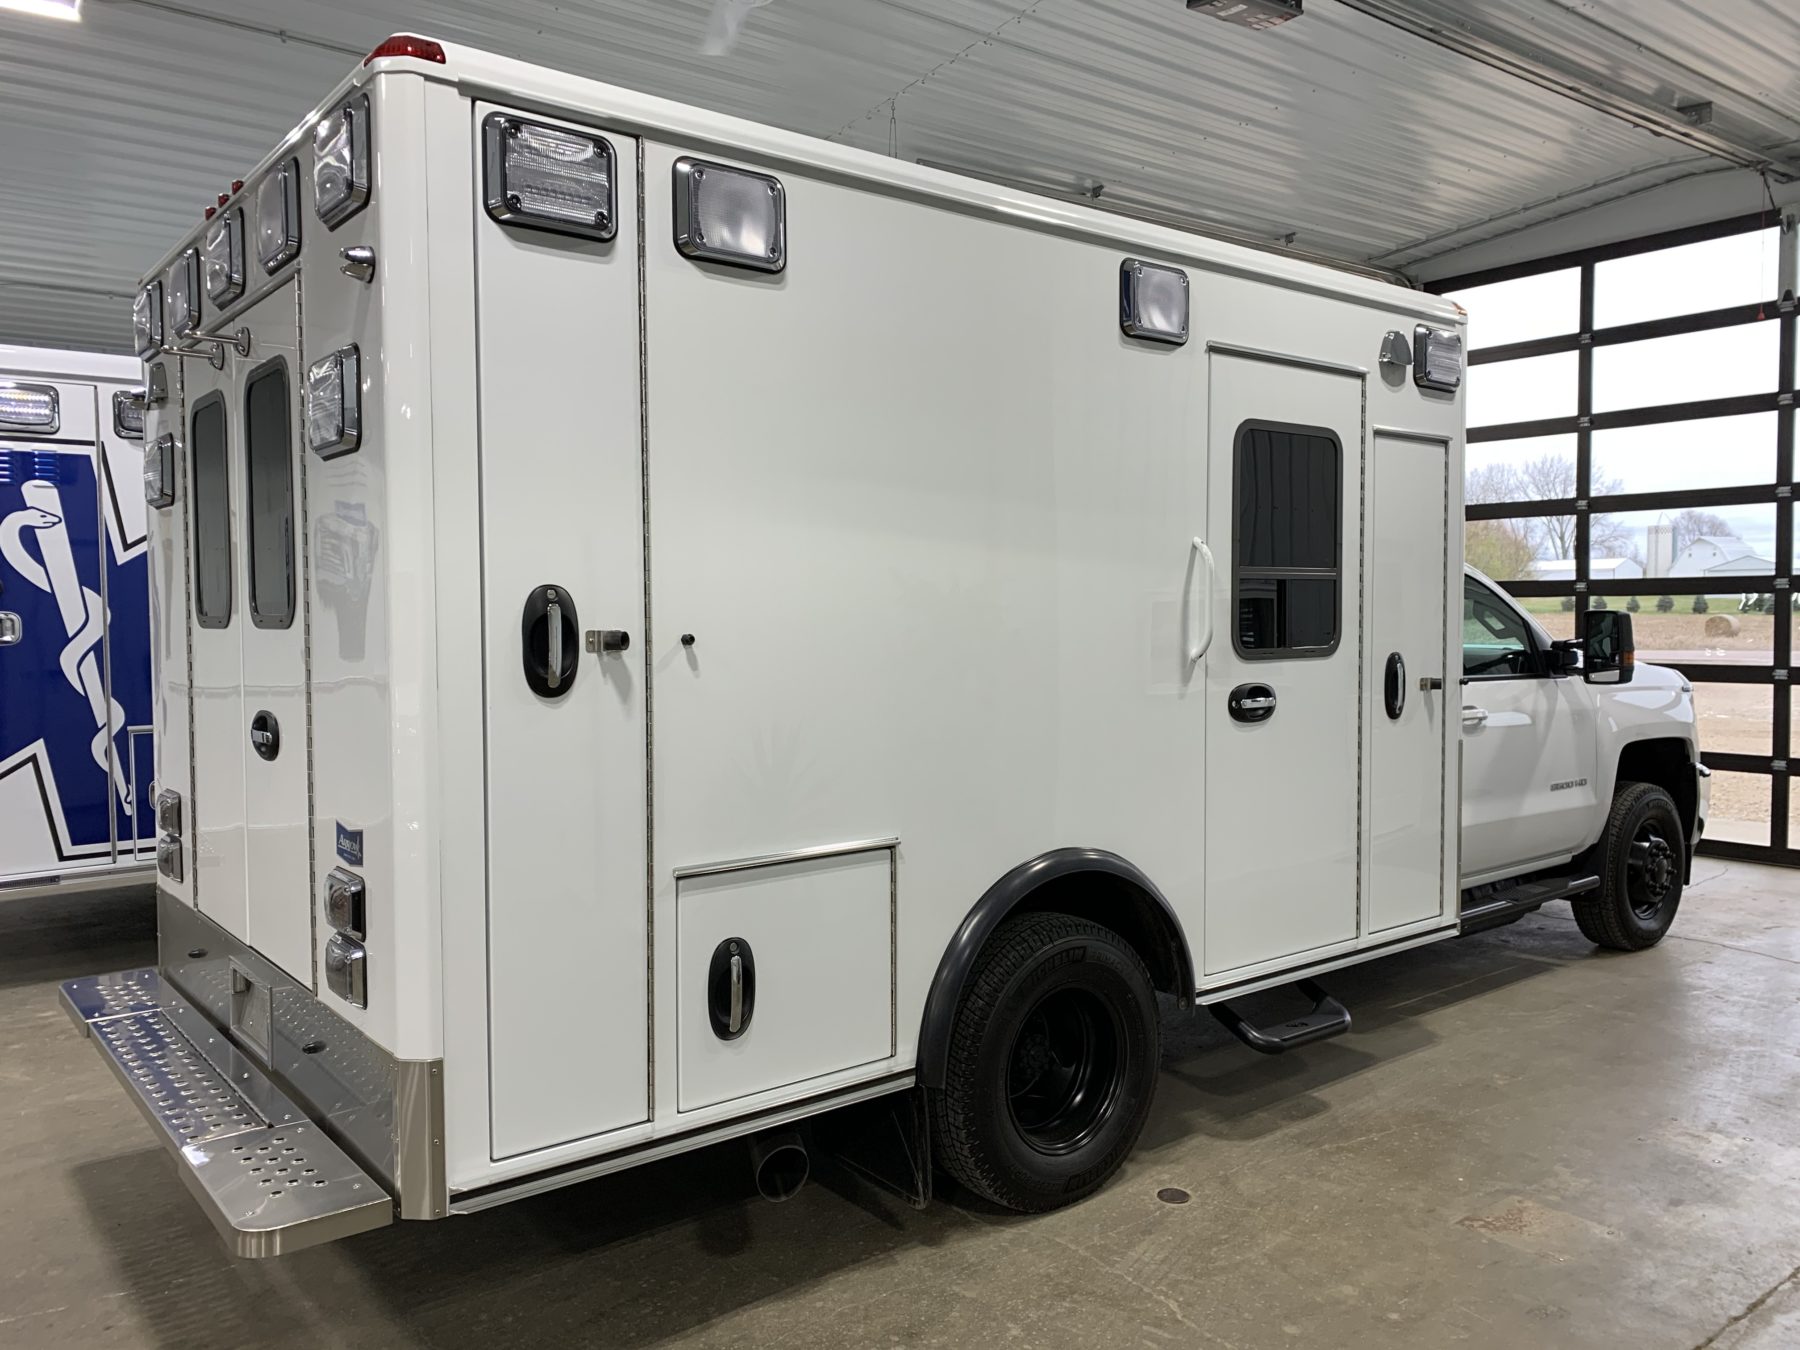 2019 Chevrolet K3500 4x4 Type 1 Ambulance For Sale – Picture 4